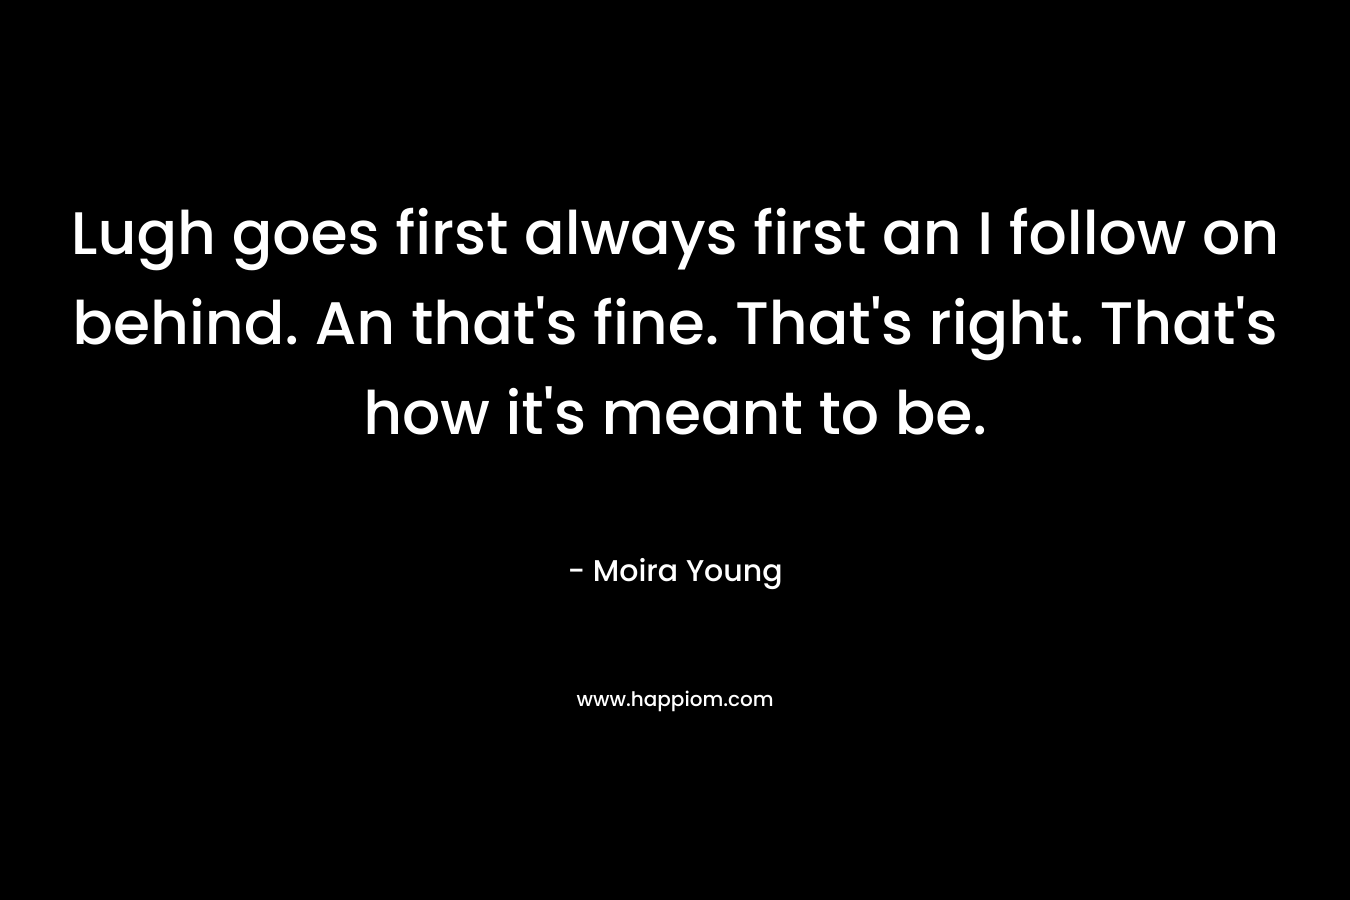 Lugh goes first always first an I follow on behind.  An that’s fine. That’s right. That’s how it’s meant to be. – Moira Young